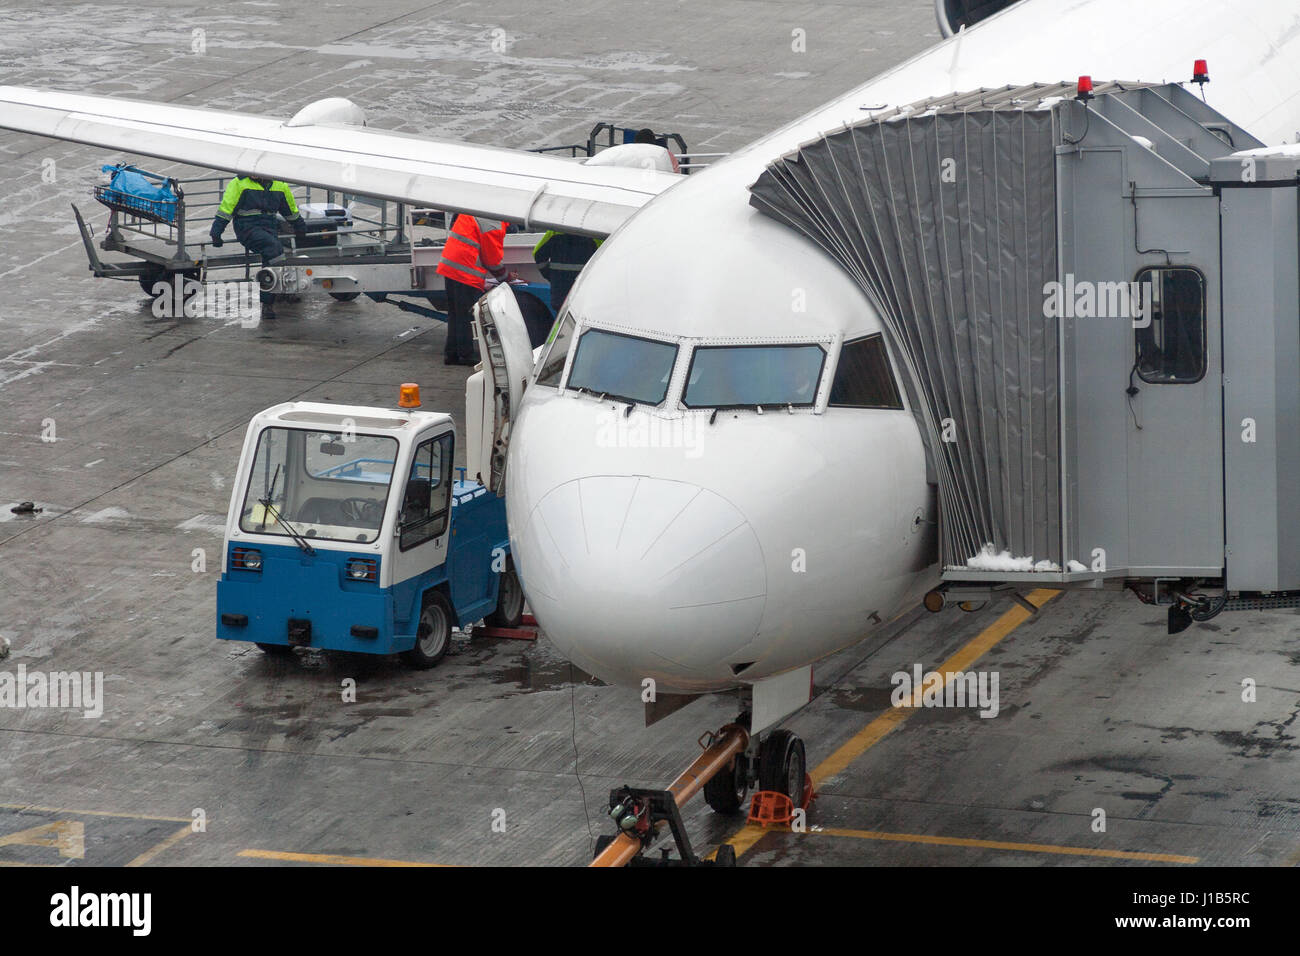 Aircraft with passage corridor being prepared for passenger boarding an airplane in a modern international airport. Stock Photo